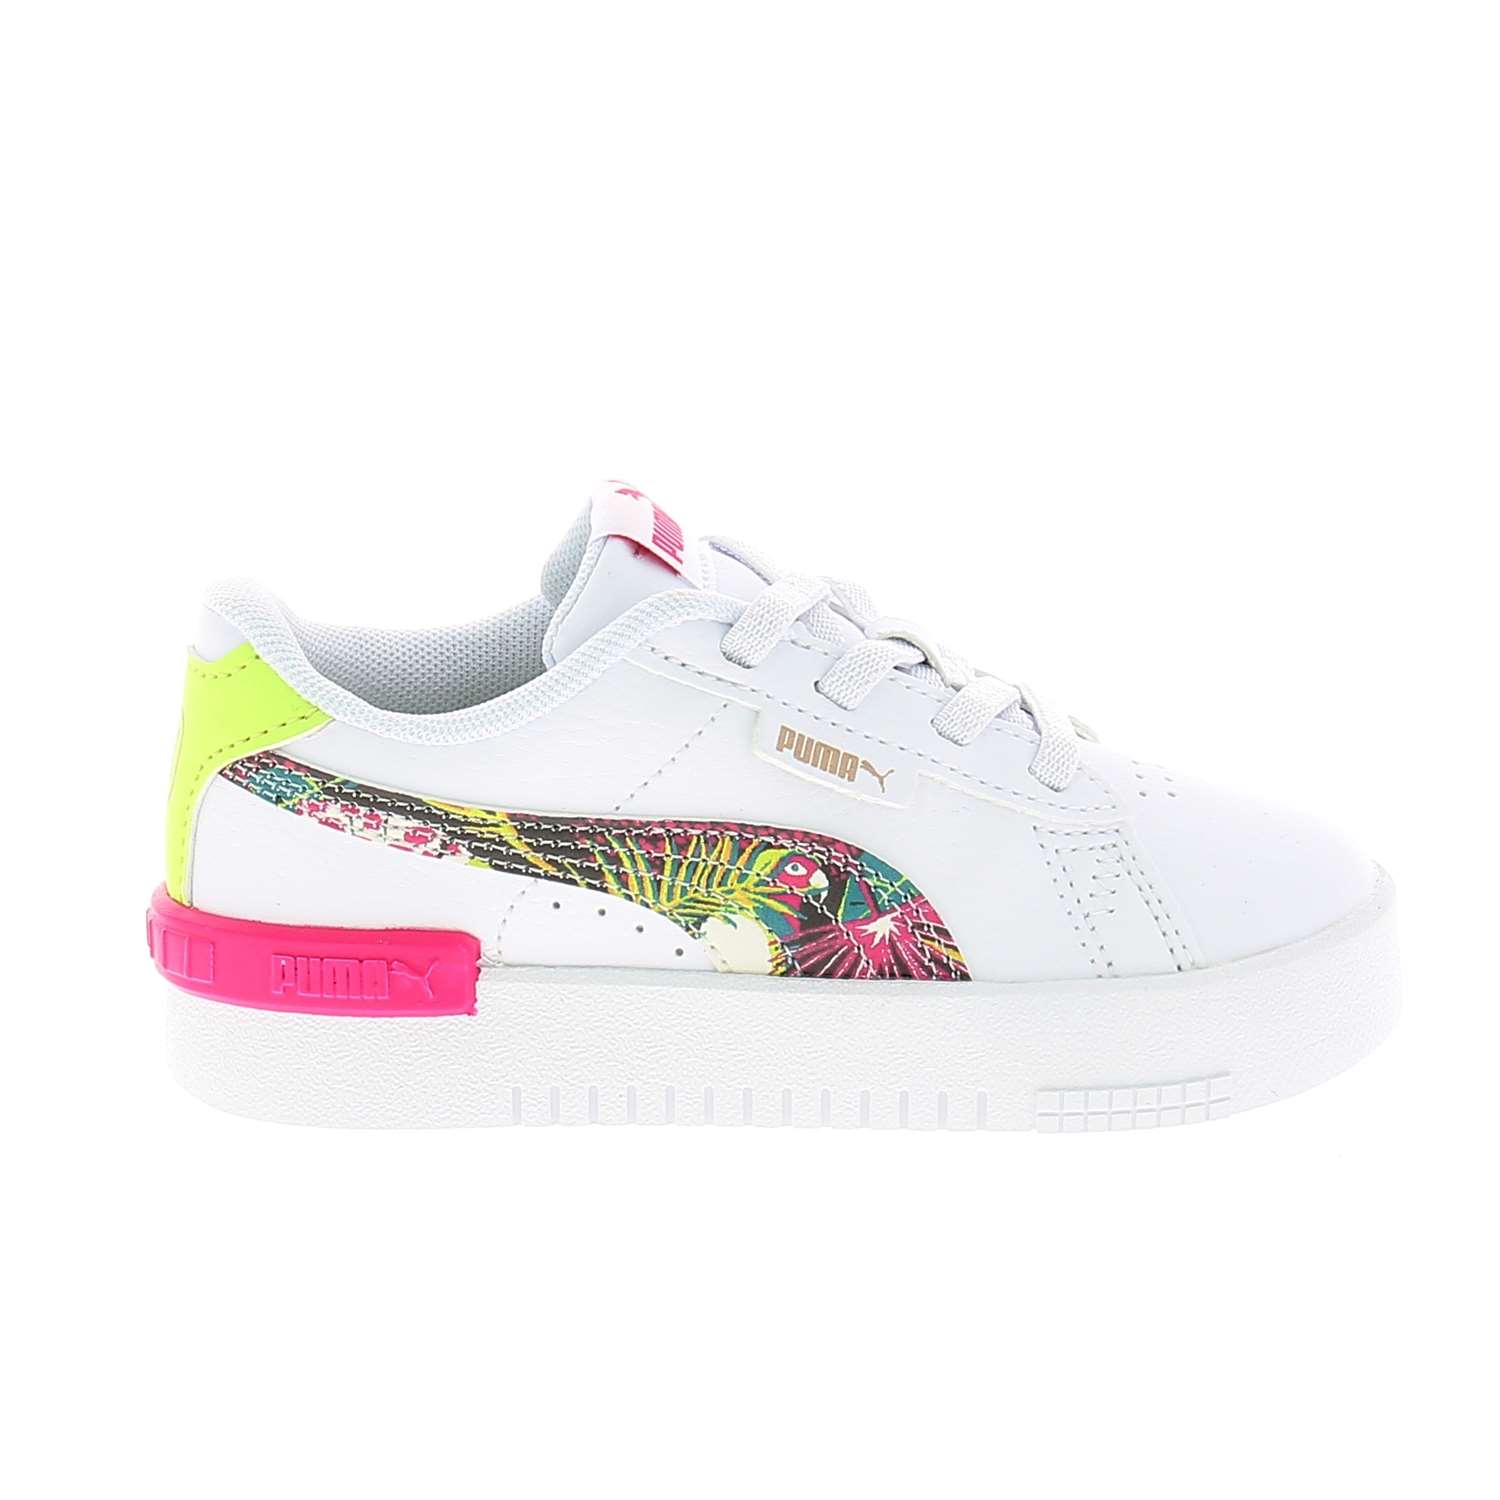 02 - JADA VACAY QUEEN AC INF - PUMA - Chaussures à lacets - Synthétique